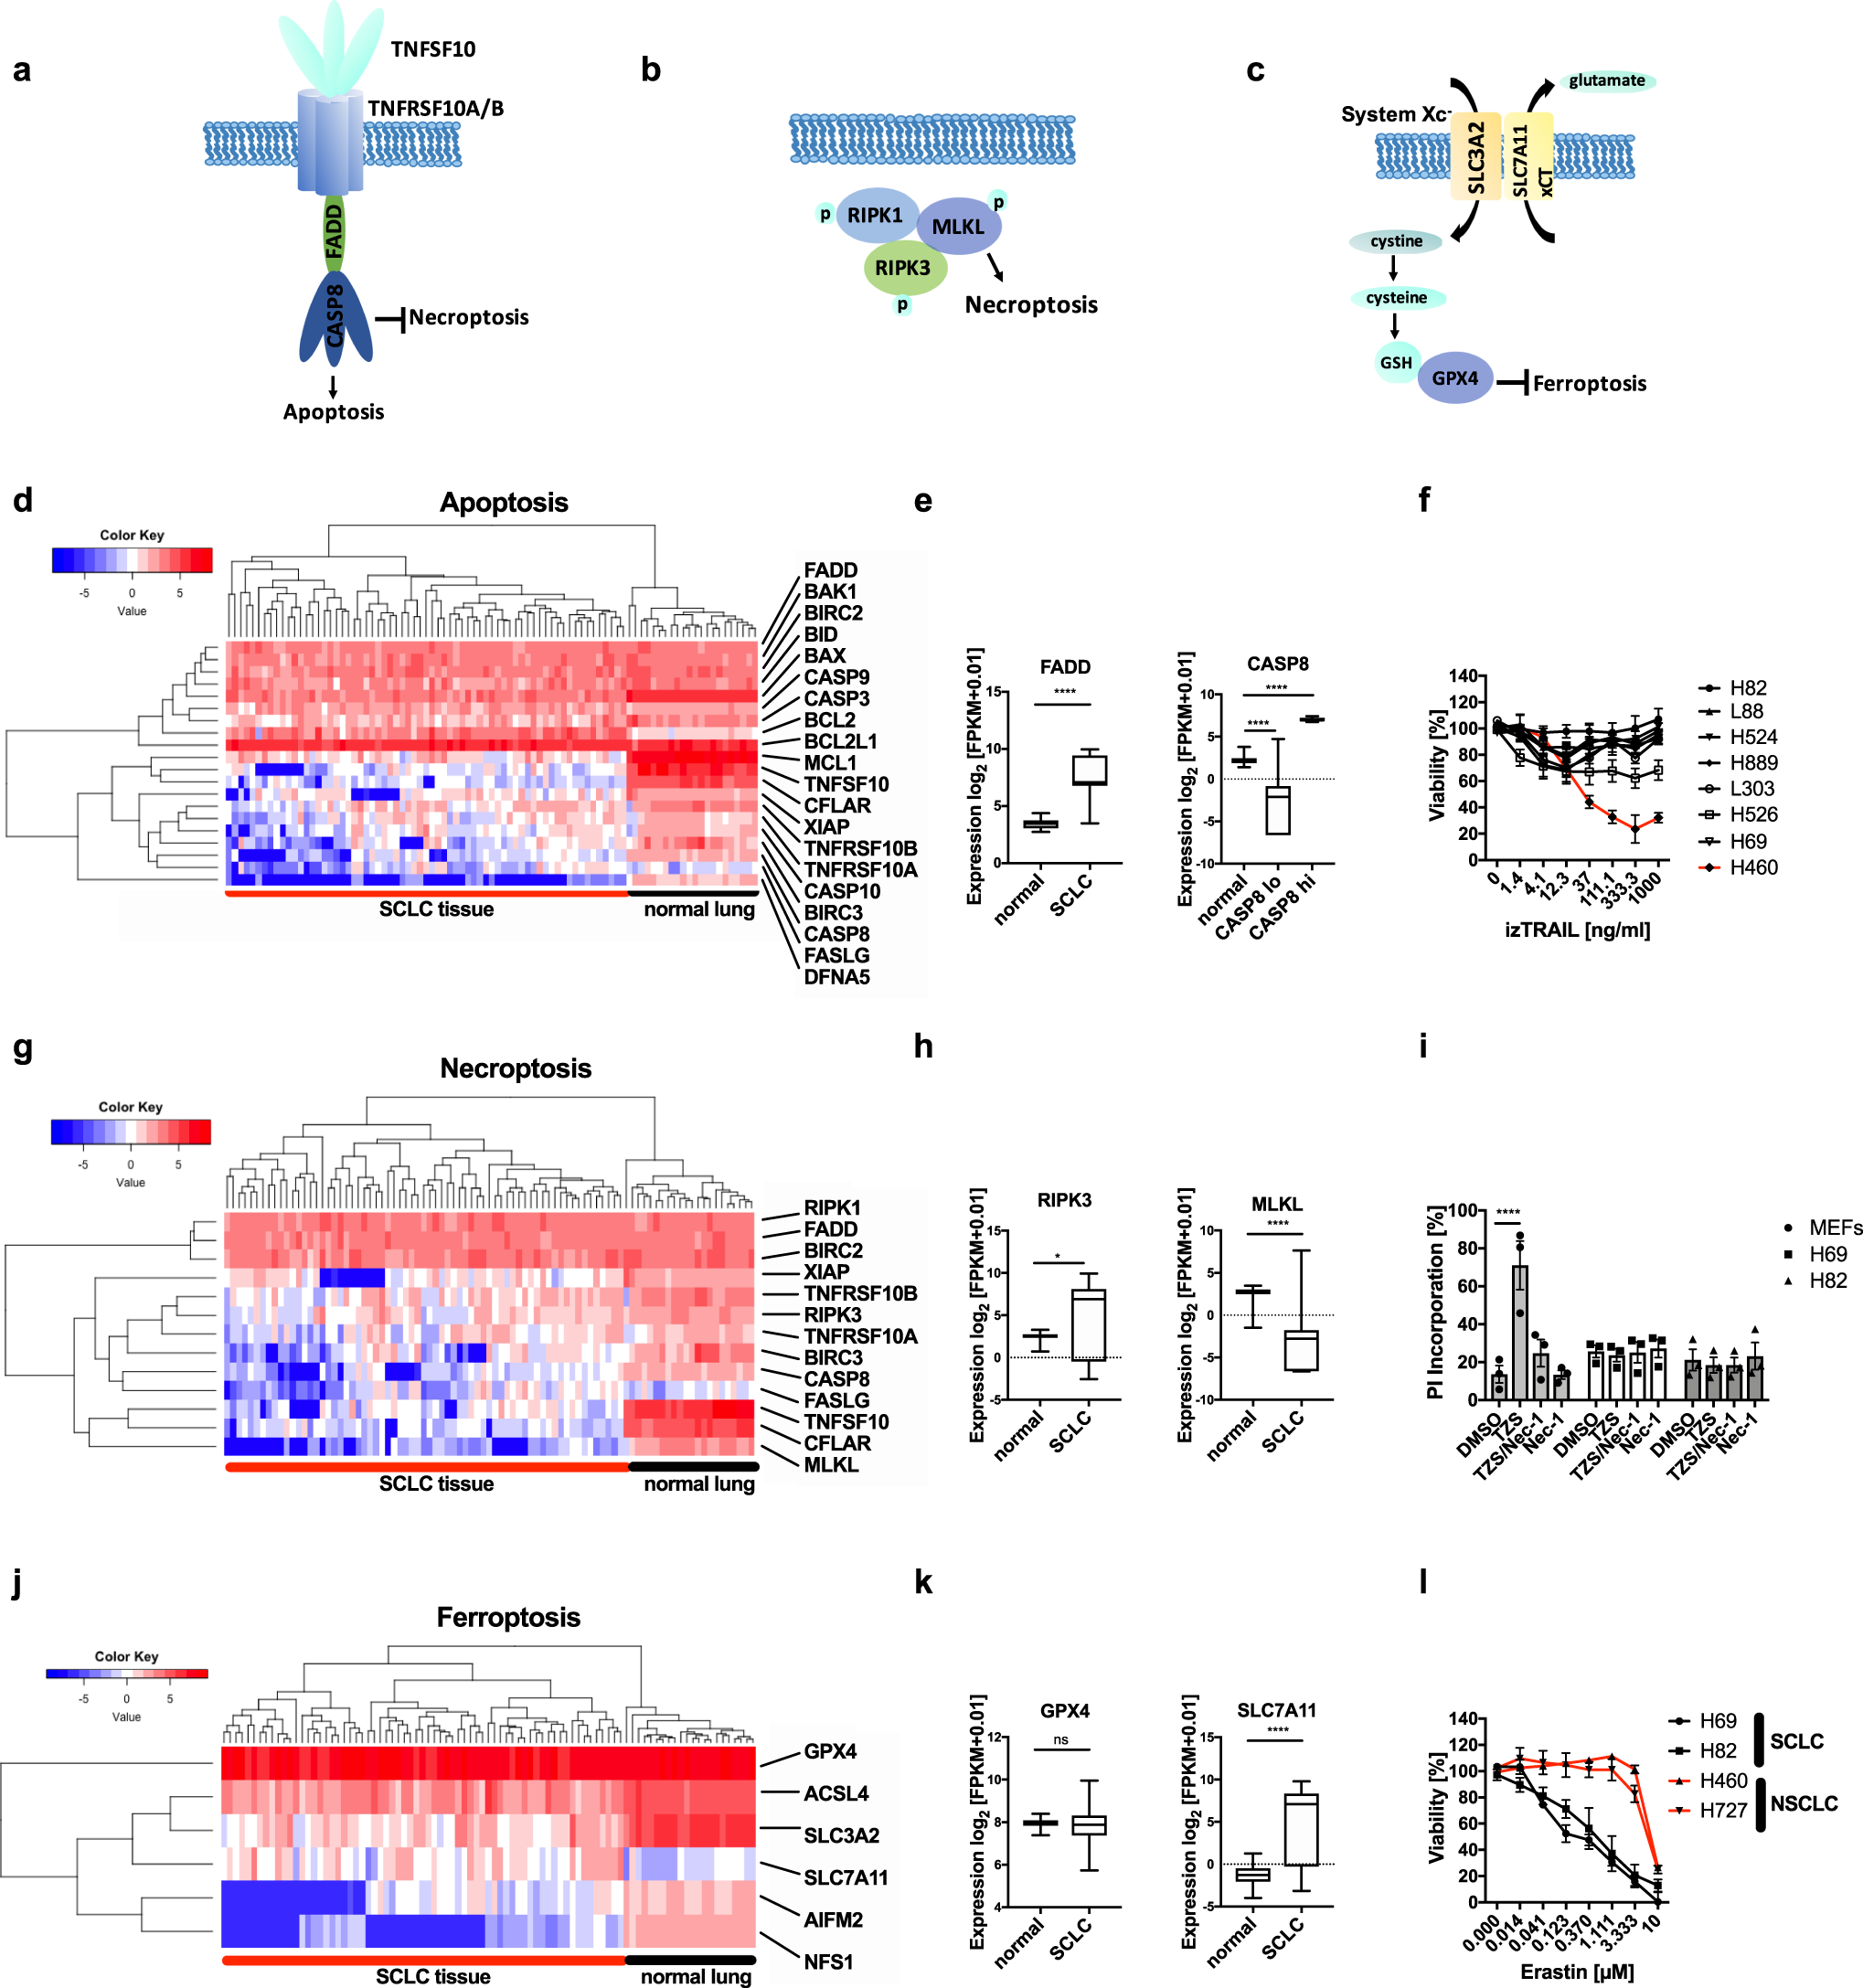 Ferroptosis response segregates small cell lung cancer (SCLC)  neuroendocrine subtypes | Nature Communications